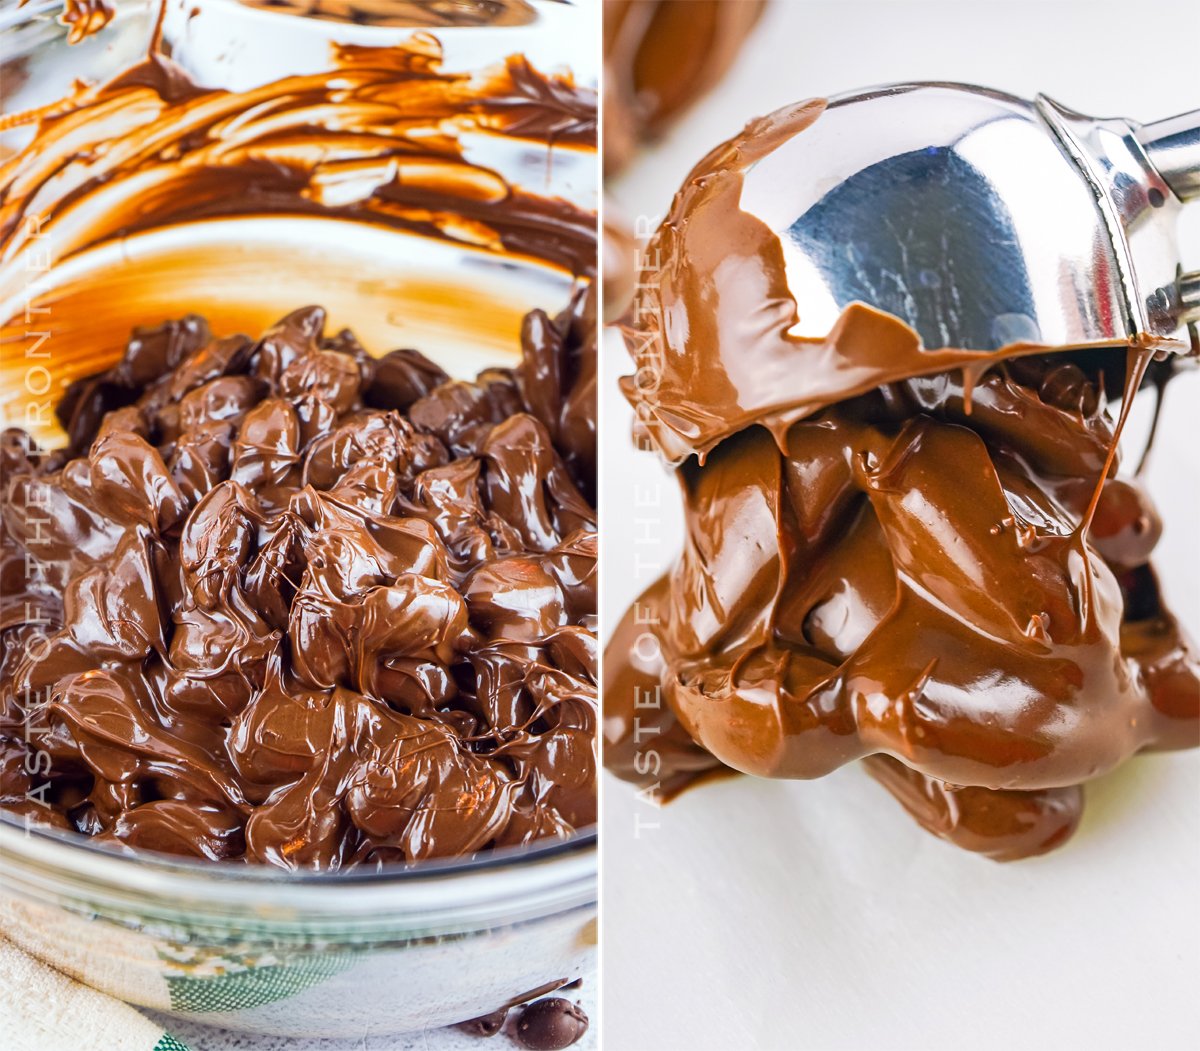 Recipe for Chocolate Nut Clusters